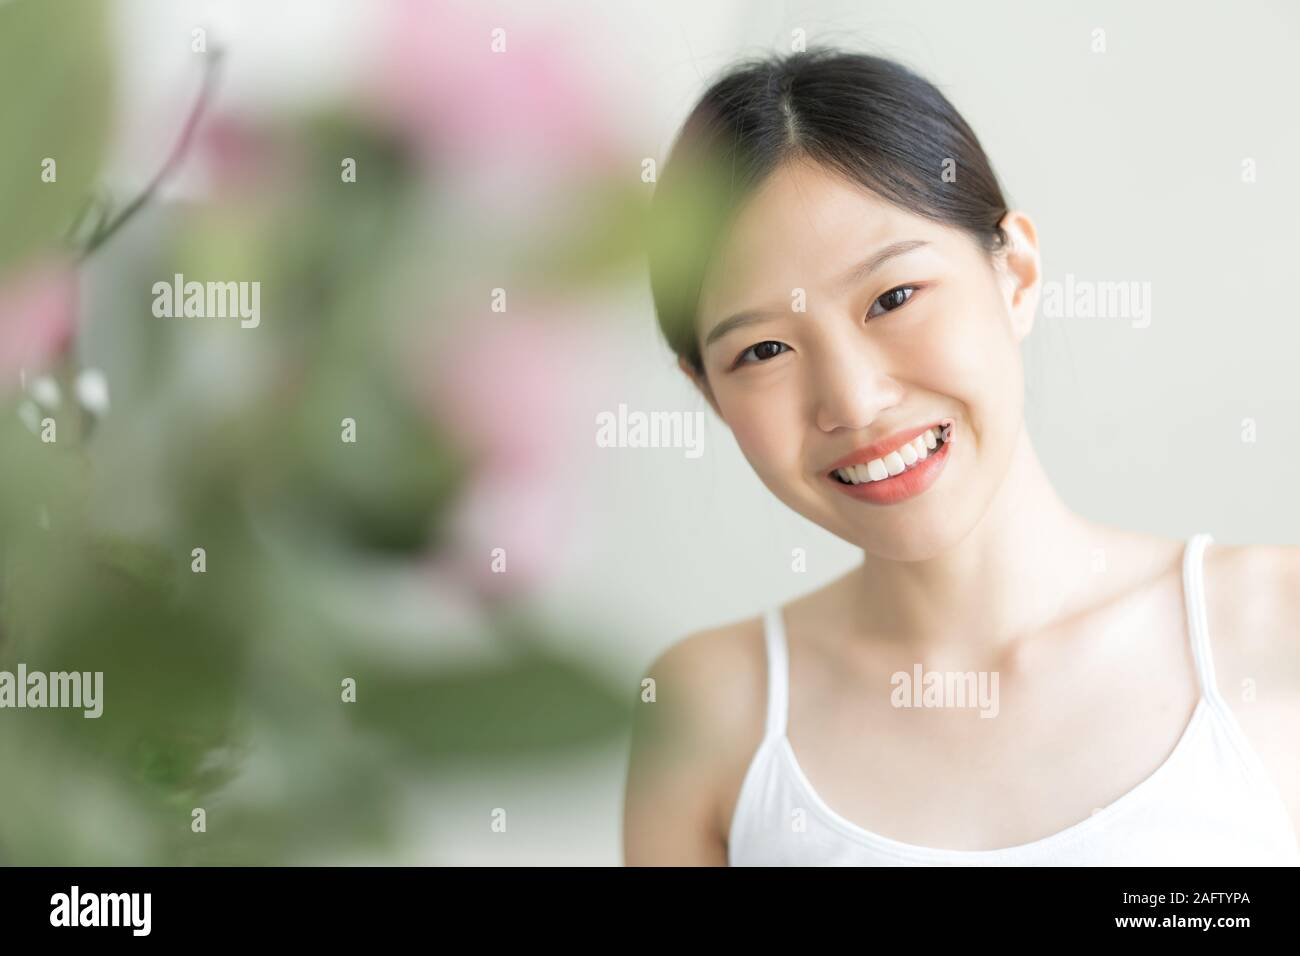 portrait young asian woman . The girl smiled at the camera. Stock Photo